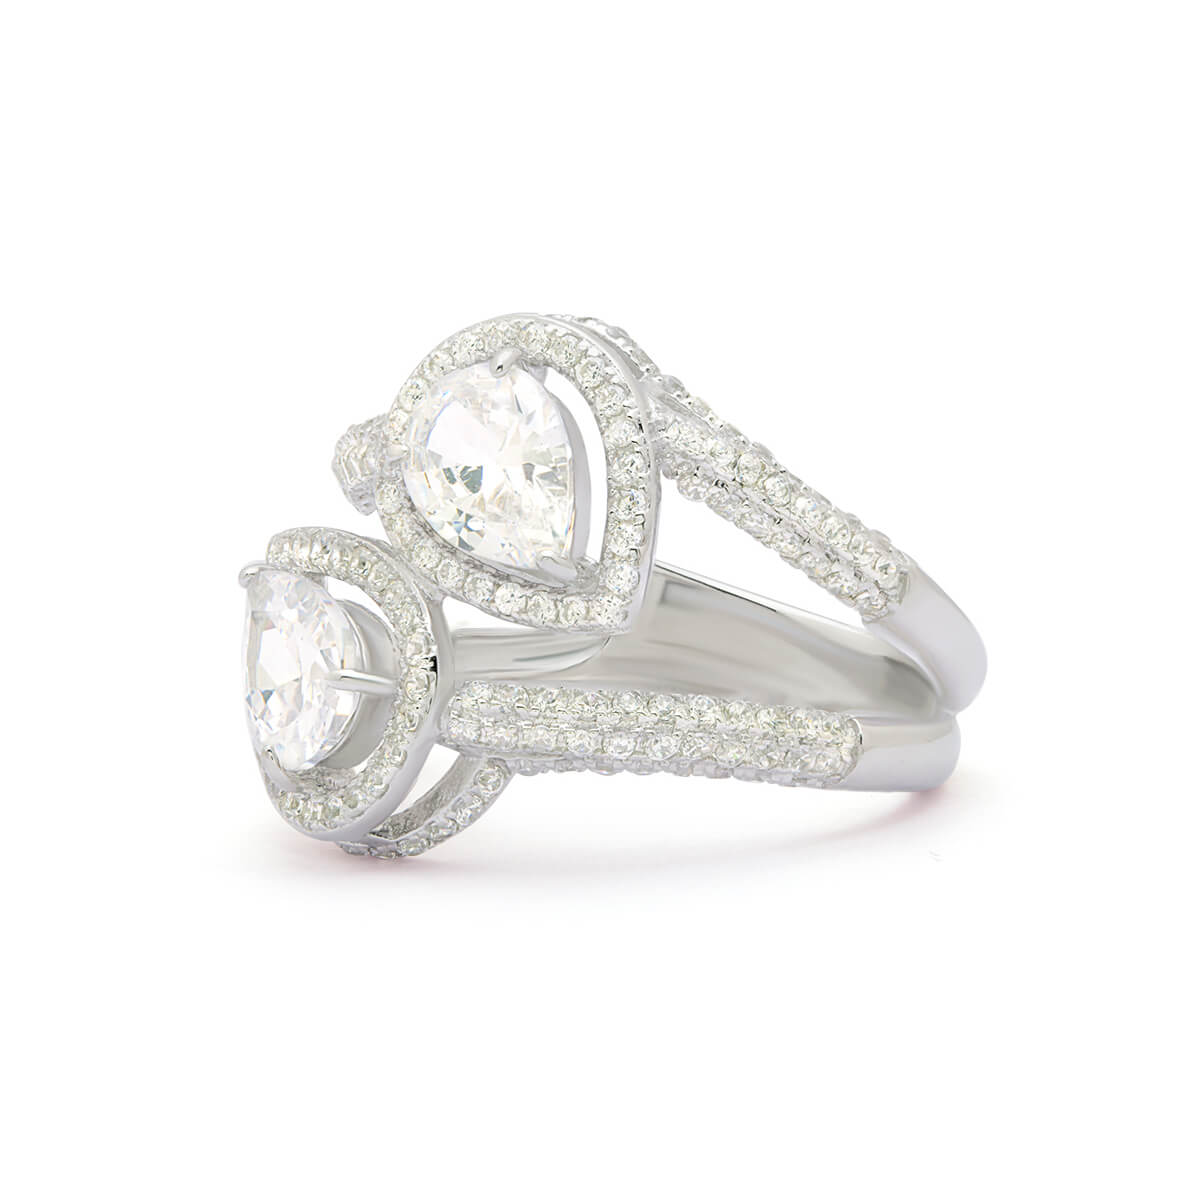 Drops Of Love Silver Ring